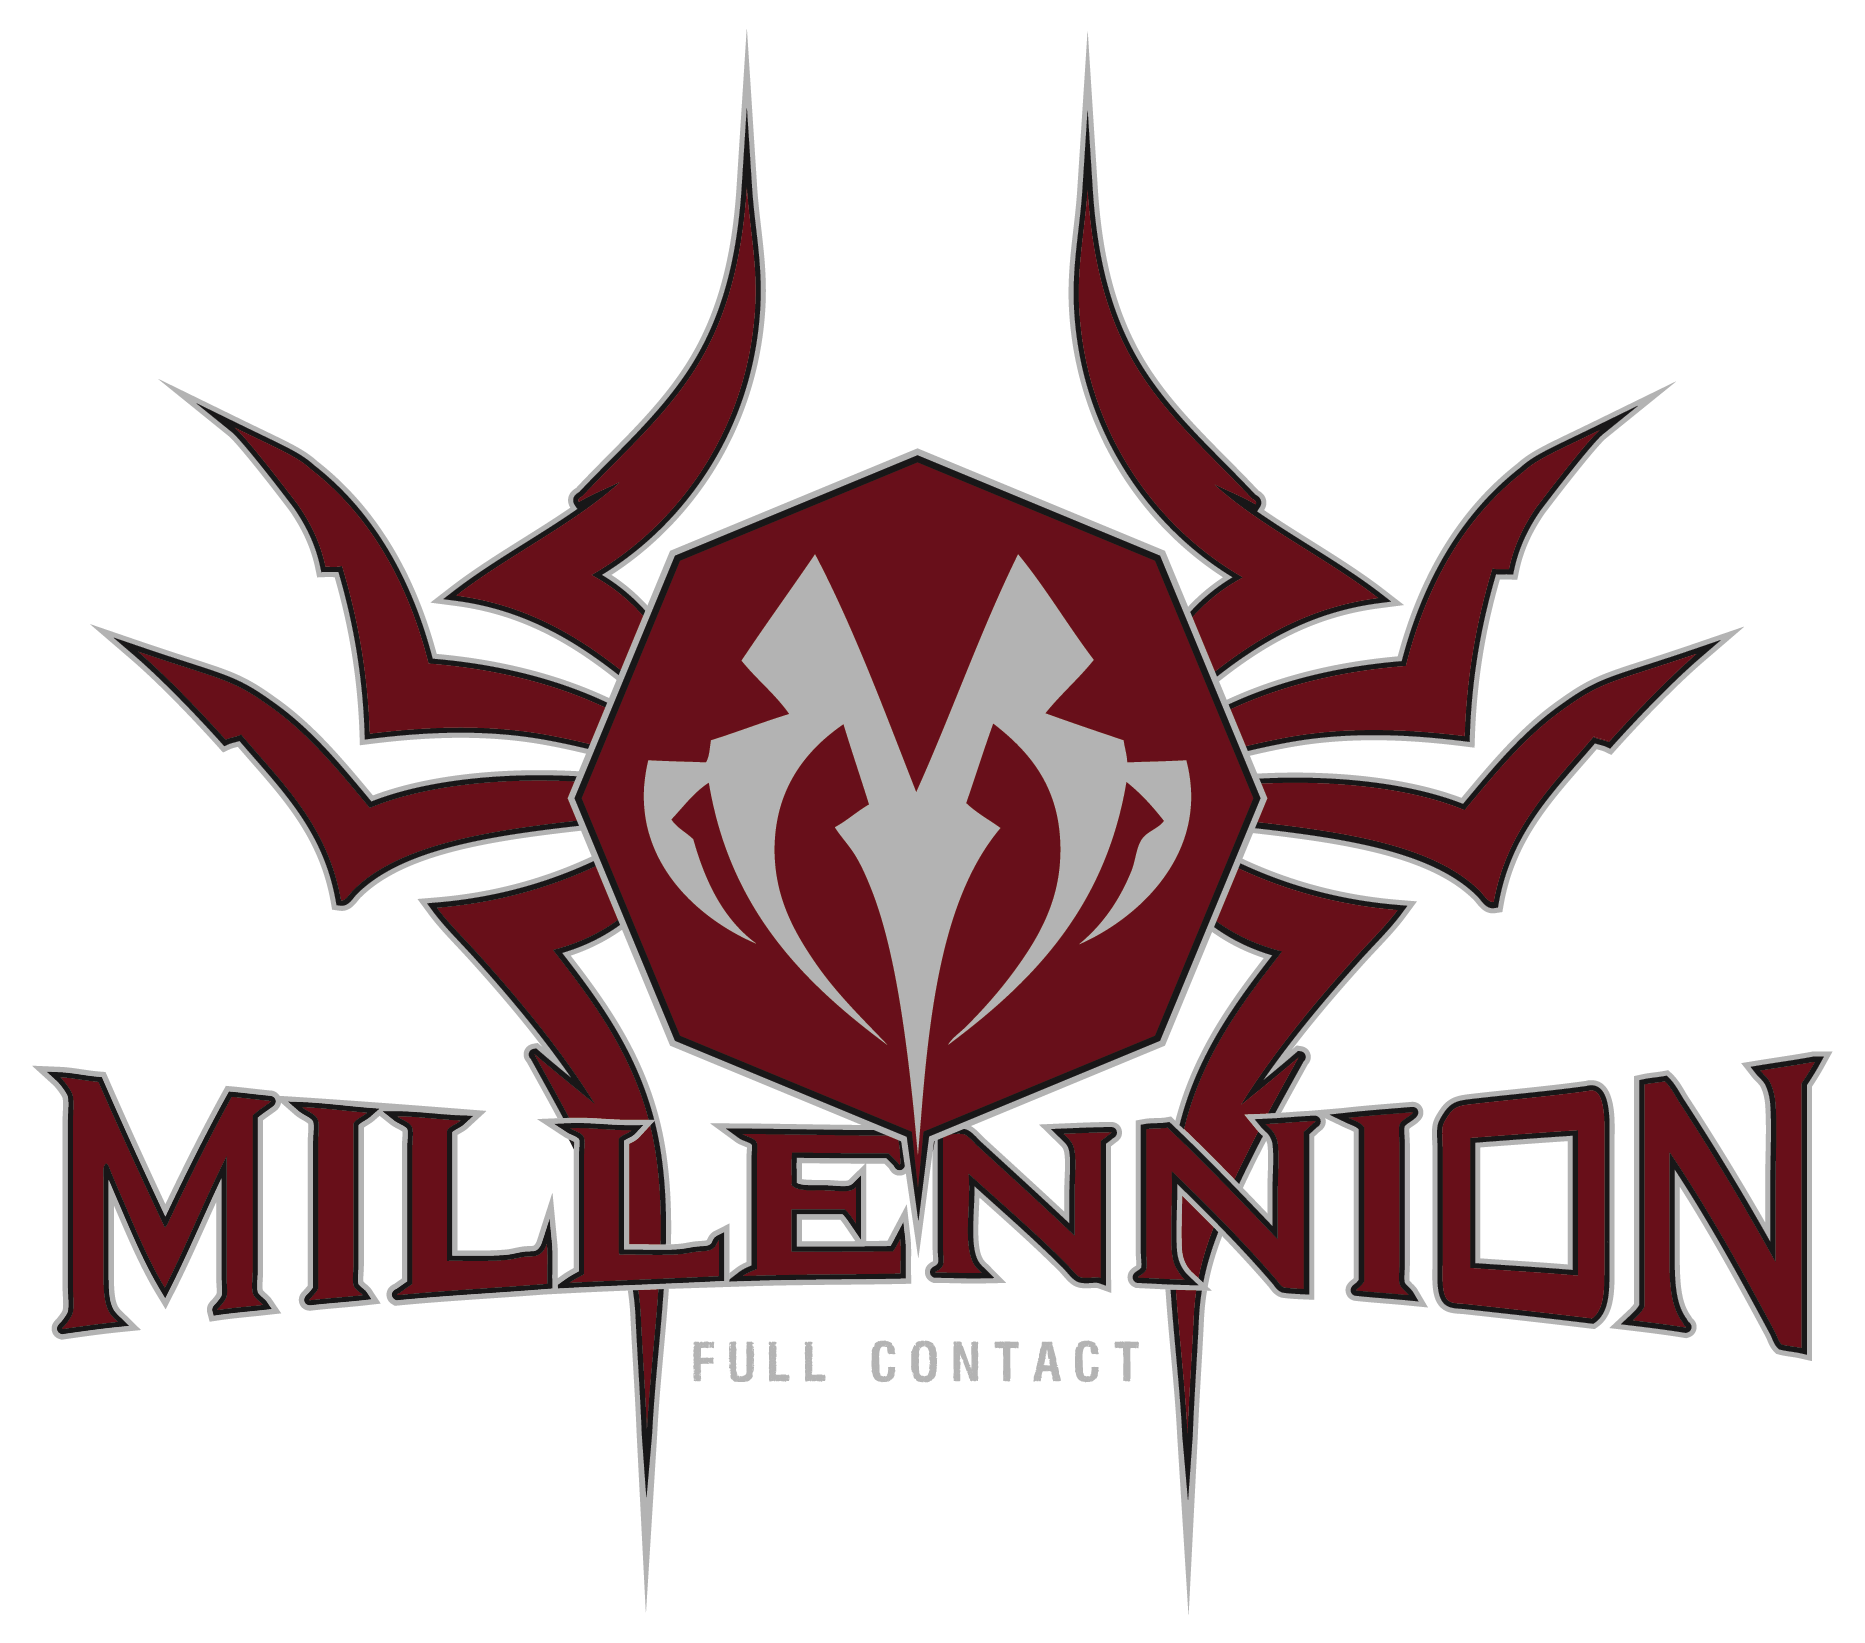 millennion_logos_final_color_on_white.png